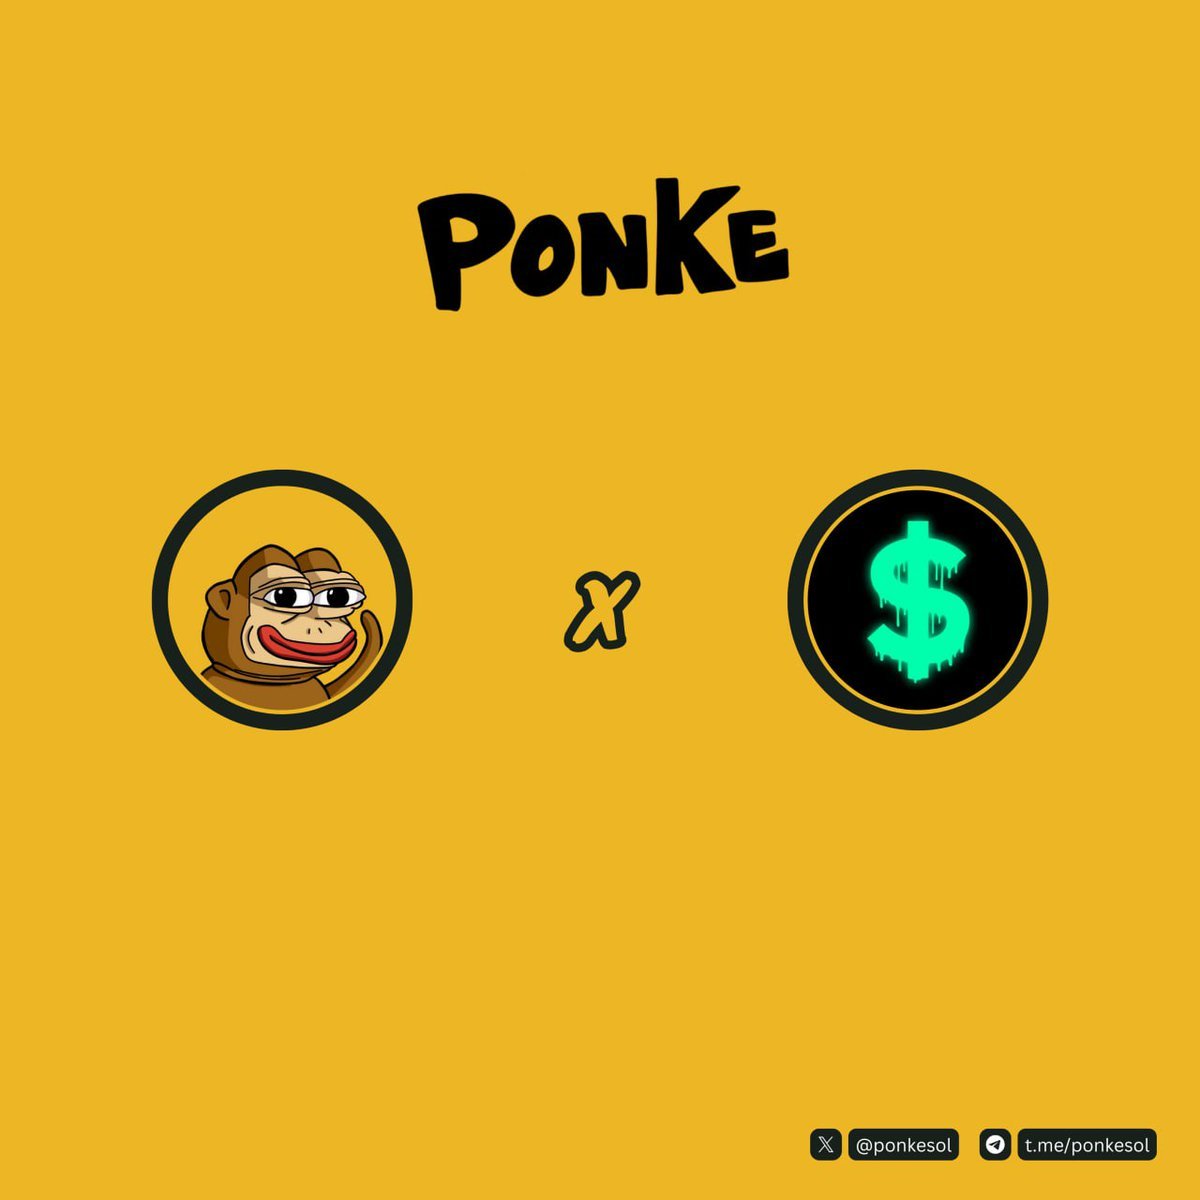 We're putting on a helmet! @ponkesol 🤝 @hey_wallet You can send $PONKE, who wants some?